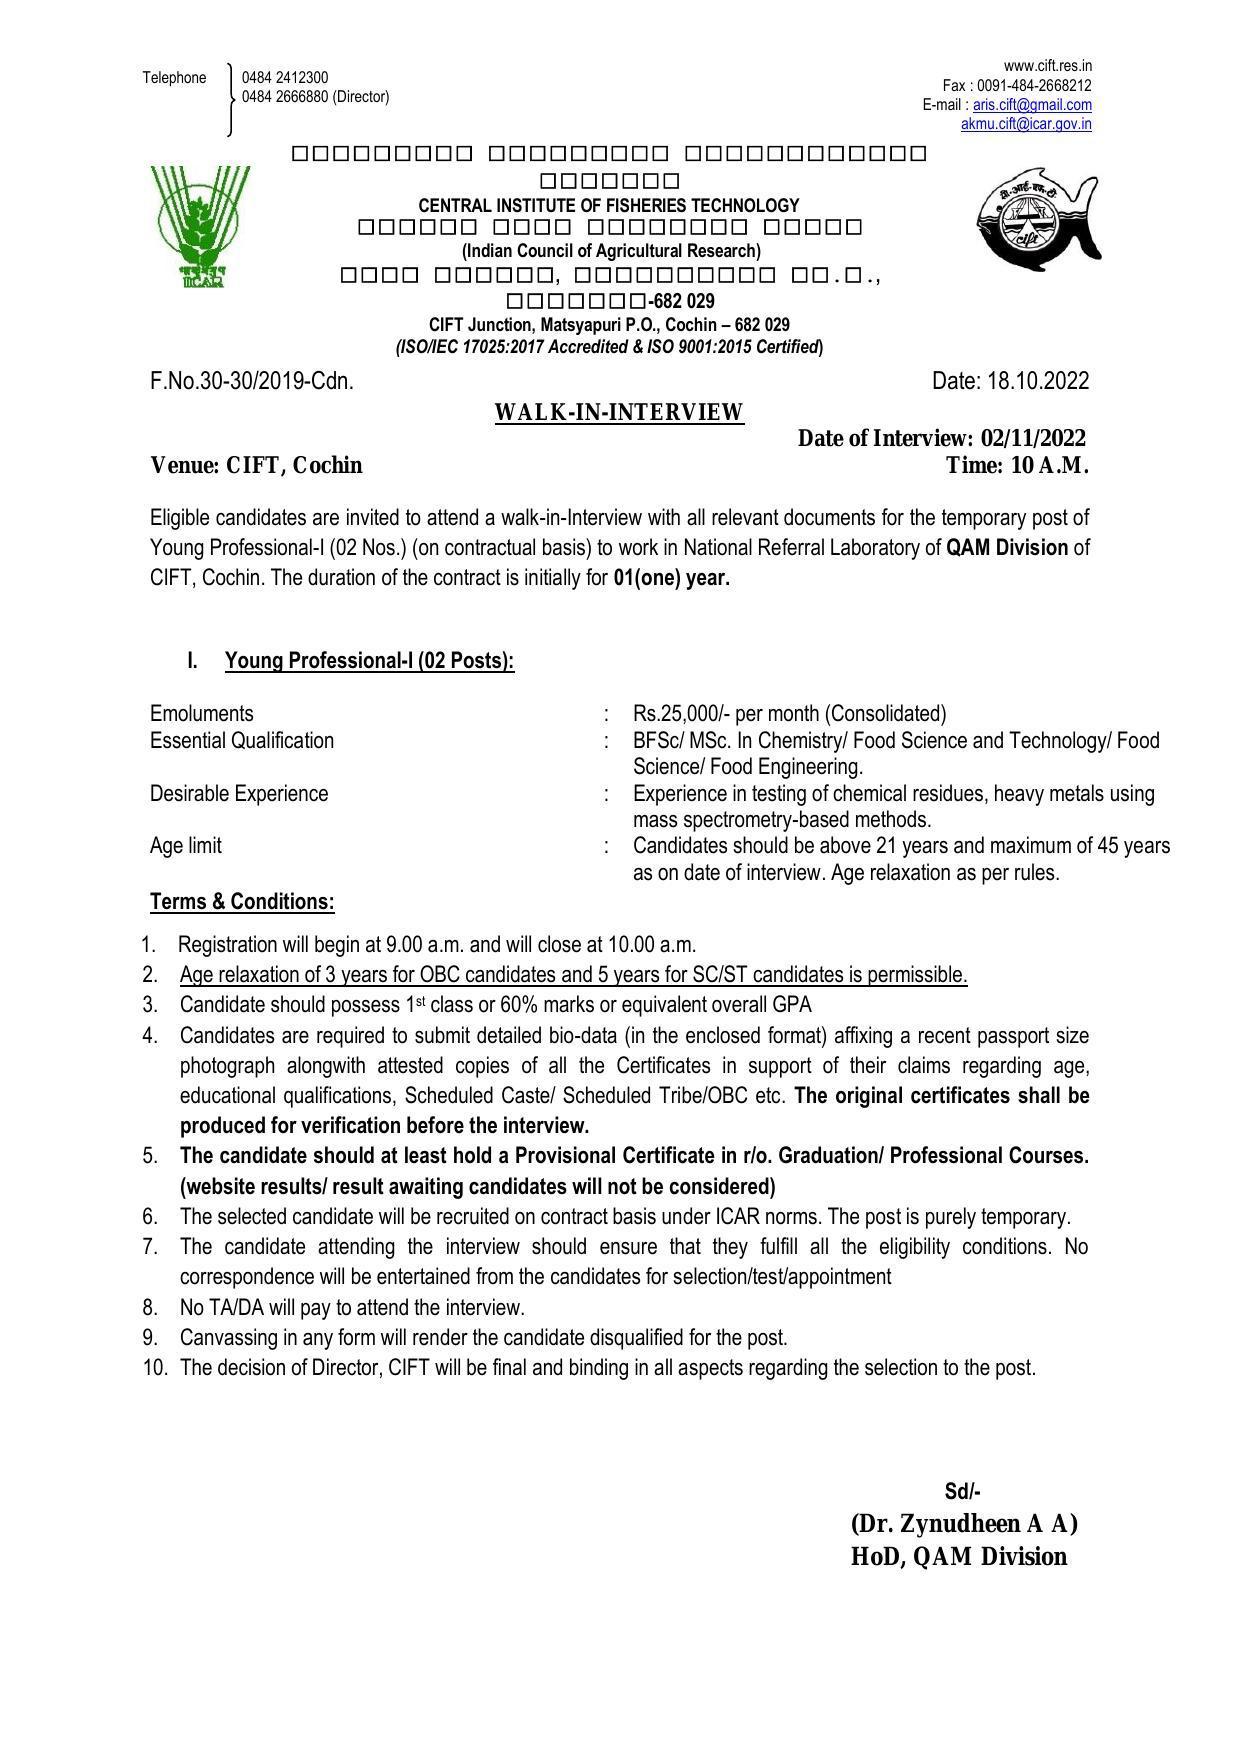 CIFT Invites Application for Young Professional-I Recruitment 2022 - Page 1